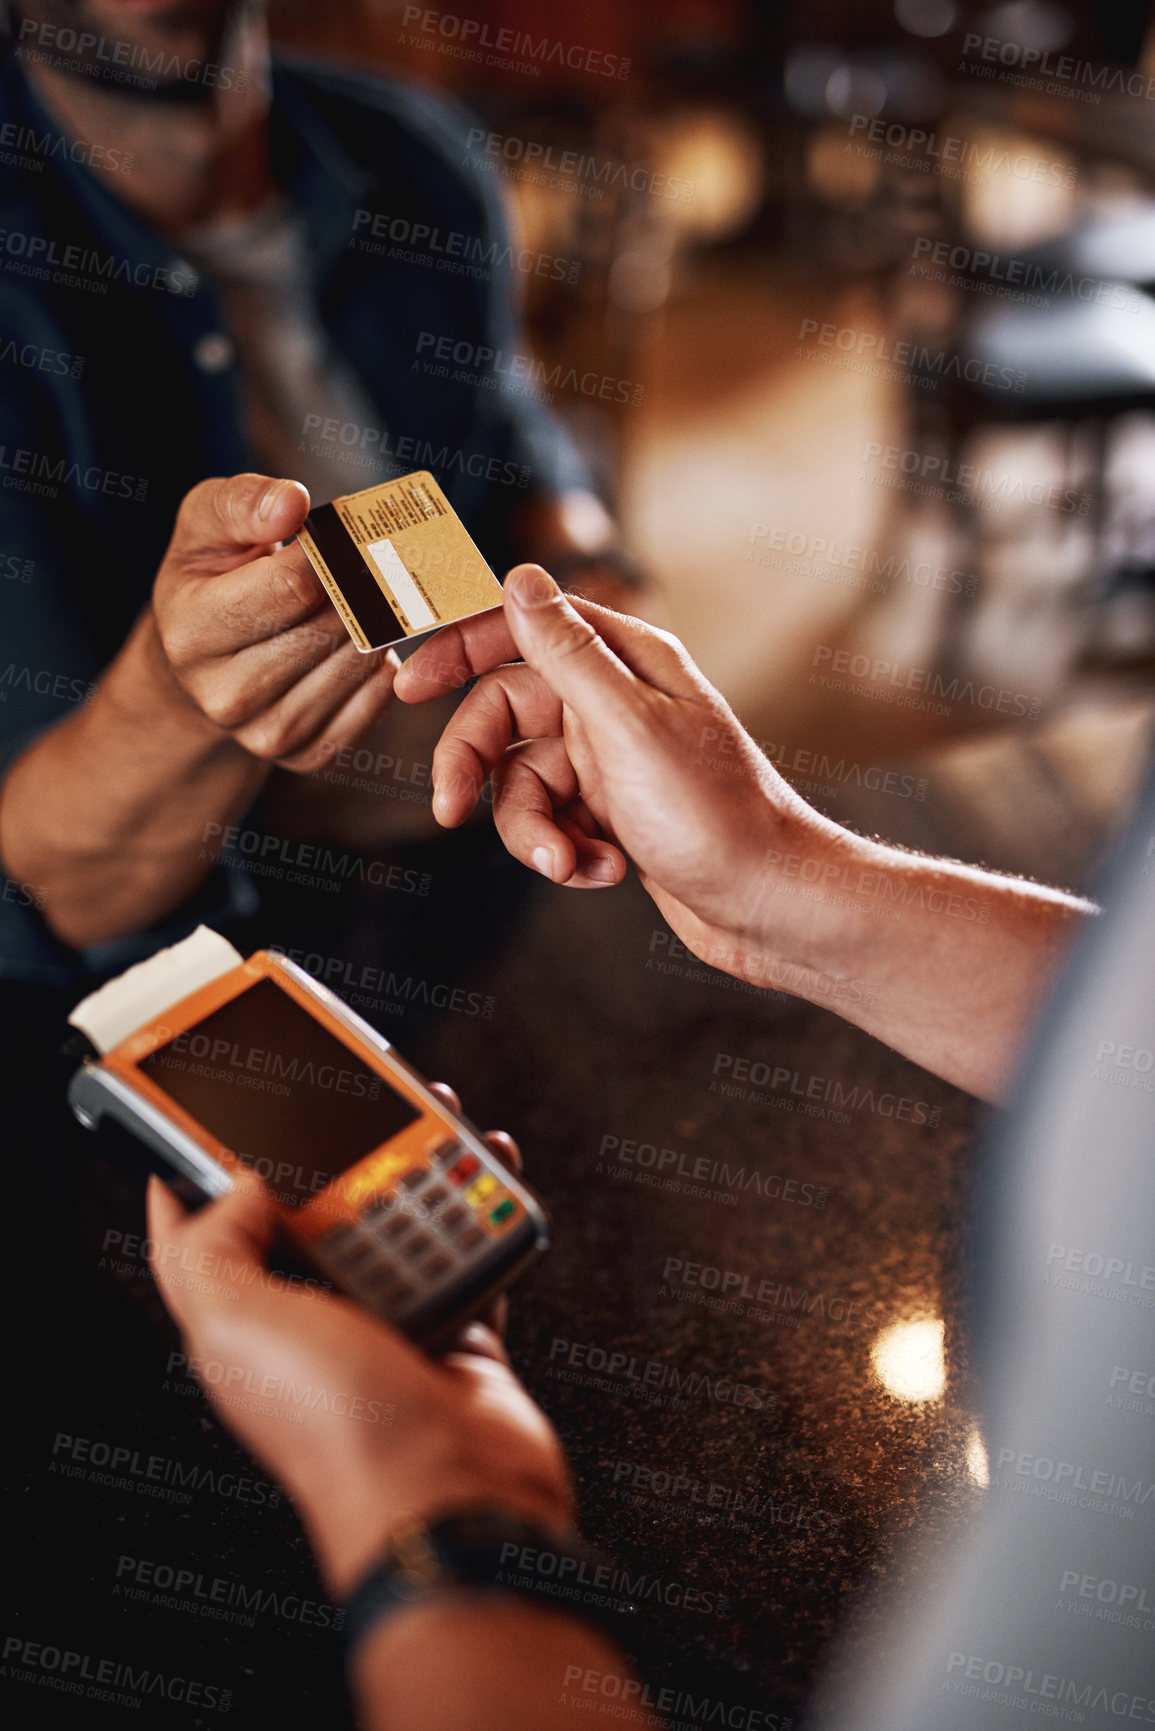 Buy stock photo Closeup of an unrecognizable person making a payment to a barman through use of a credit card inside a beer brewery during the day